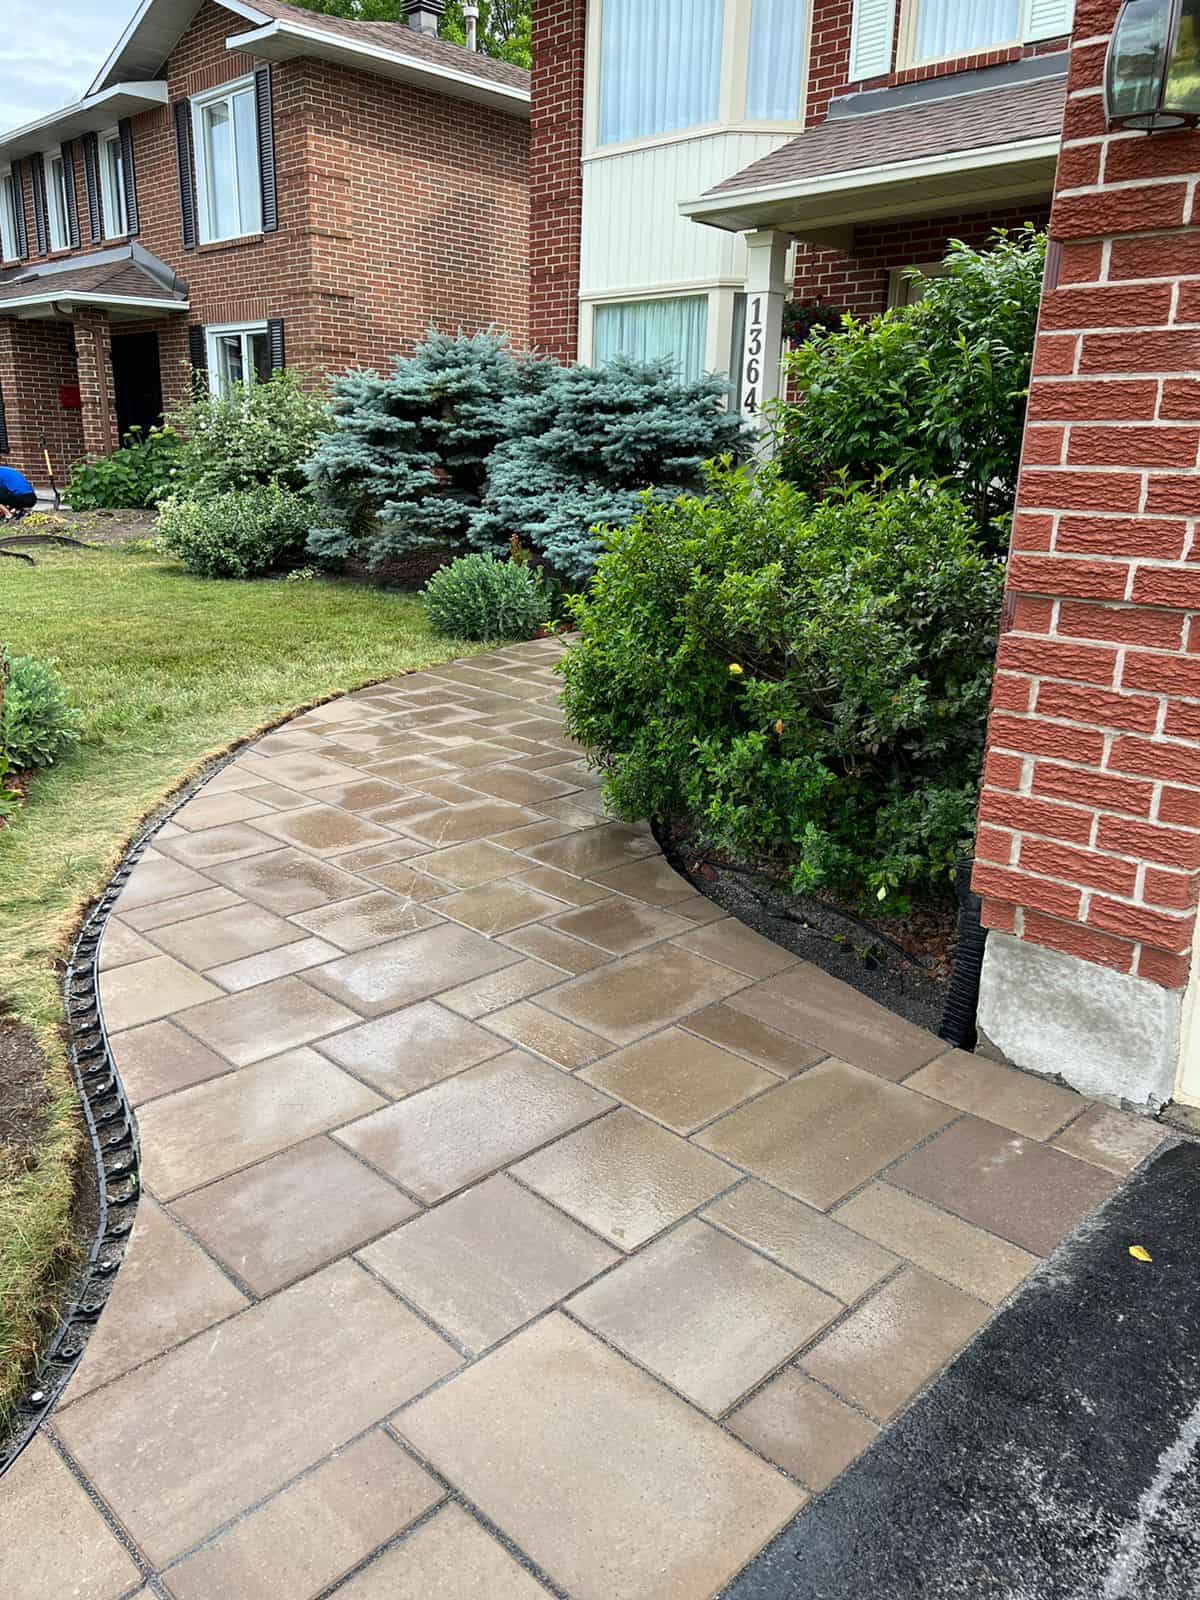 A newly installed walkway leading to a residential home, featuring beige paving stones arranged in an interlocking pattern, bordered by a neatly trimmed lawn and established shrubbery.